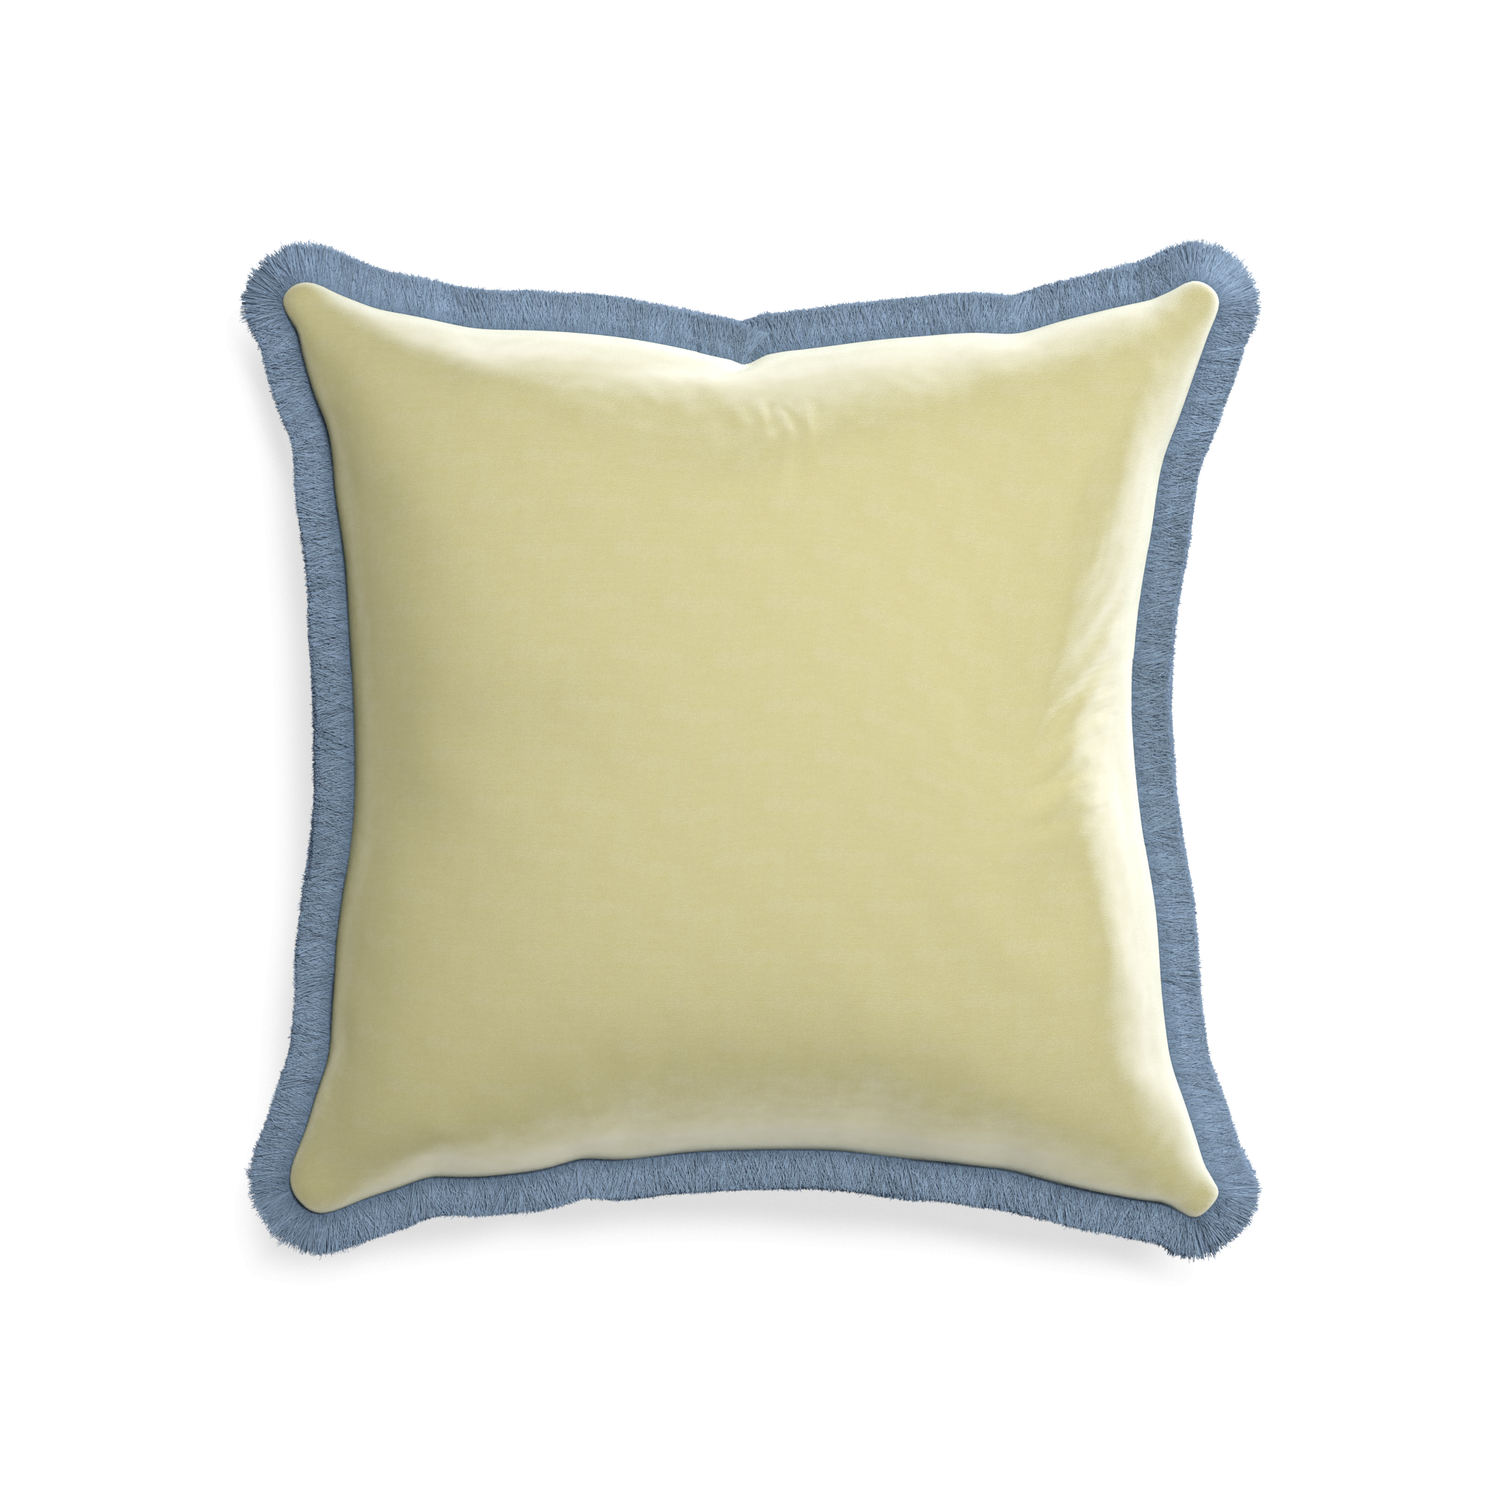 square light green pillow with sky blue fringe